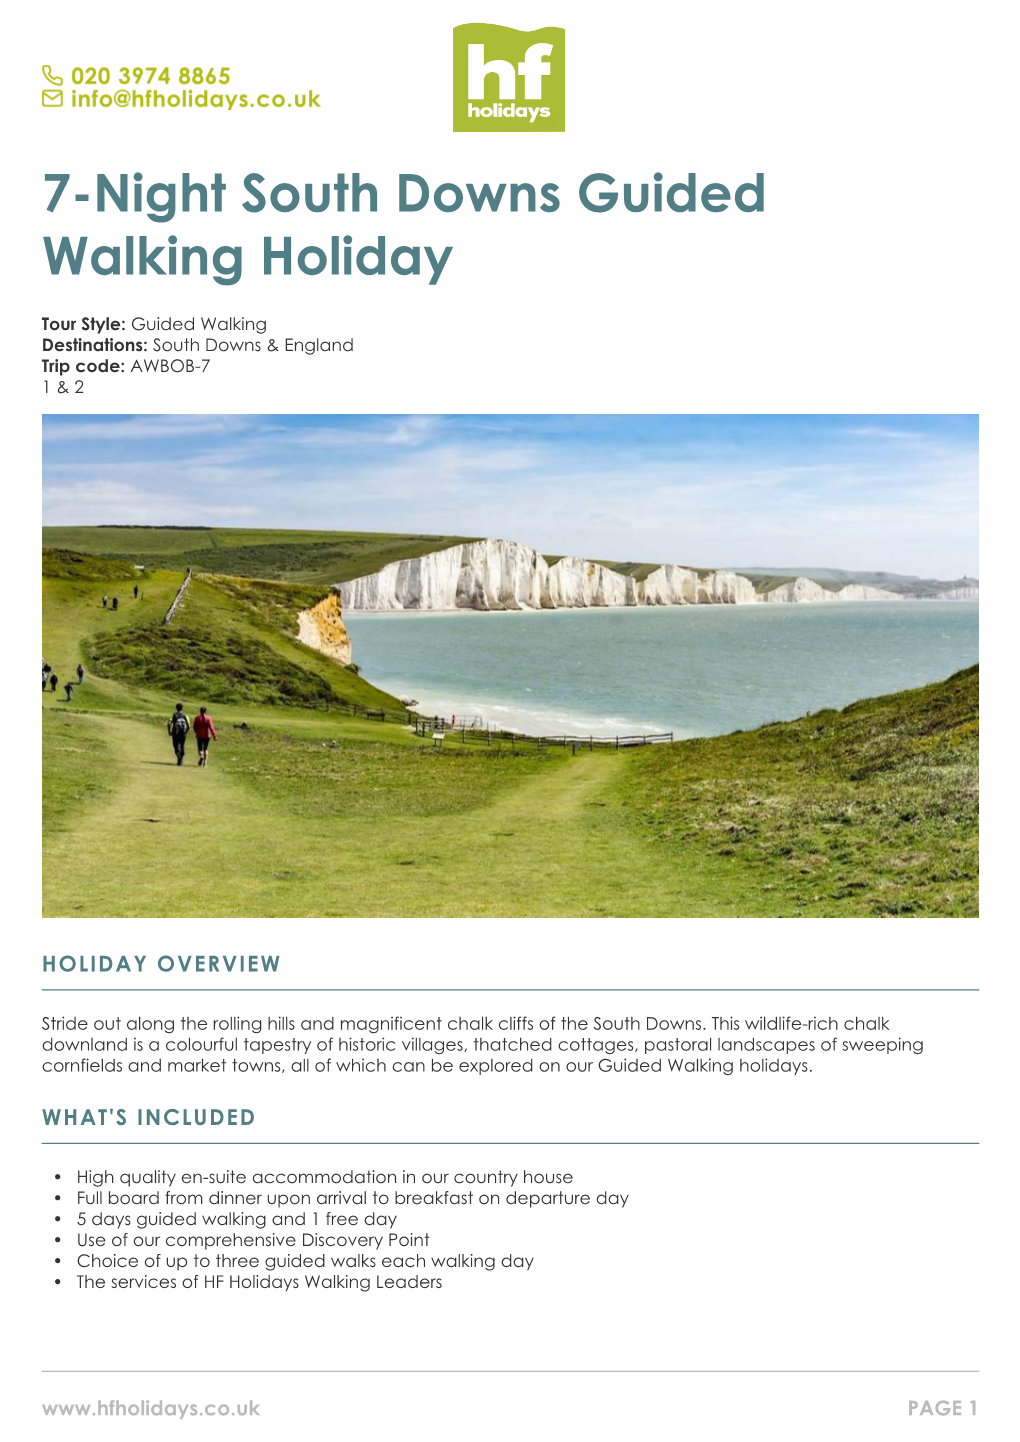 7-Night South Downs Guided Walking Holiday